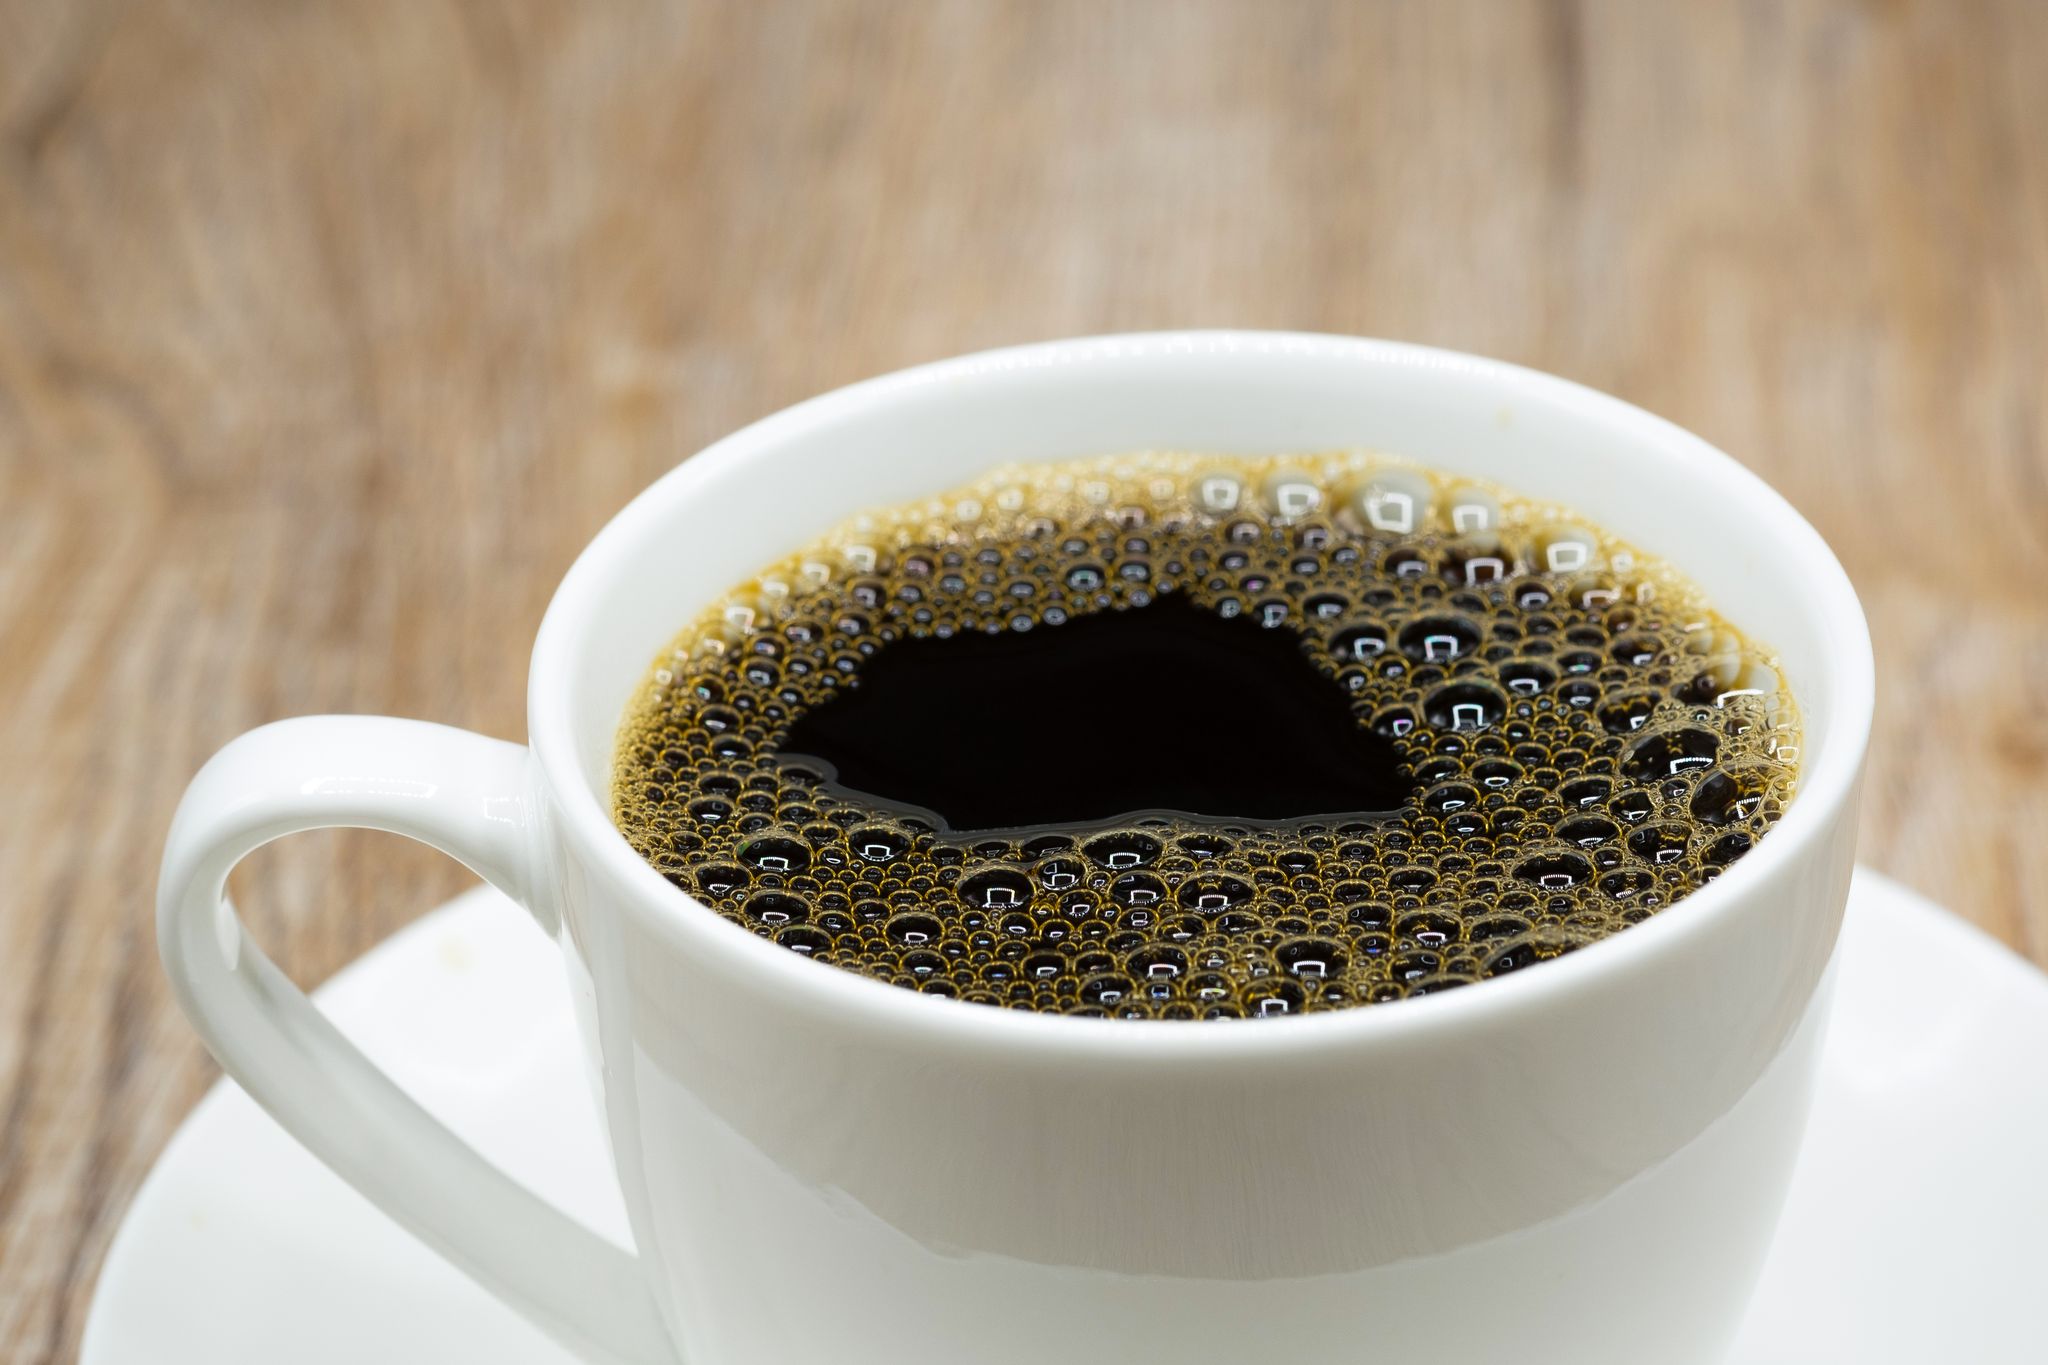 A cup of black coffee. | Source: Shutterstock